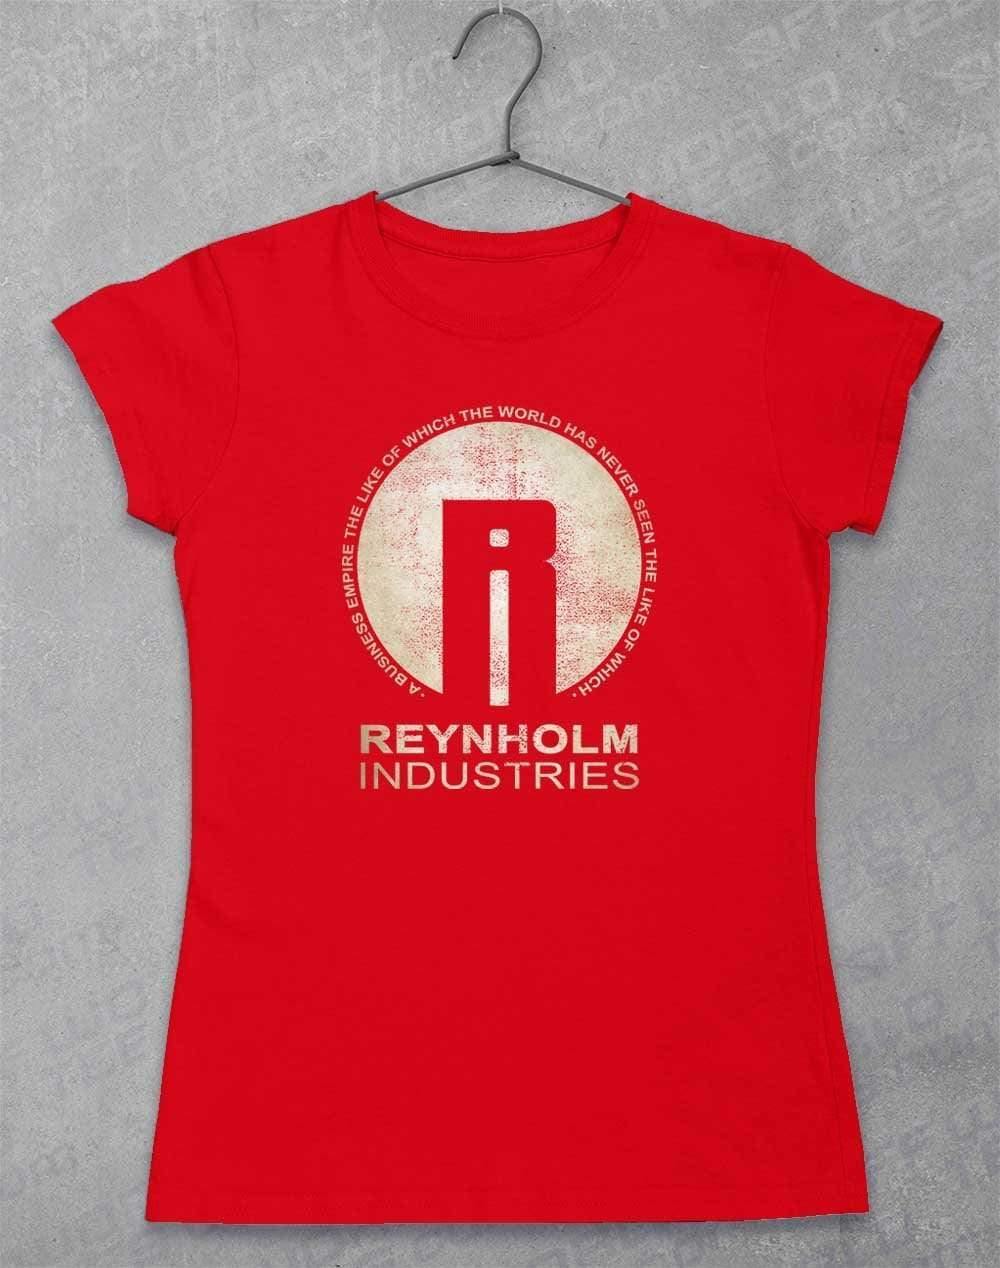 Reynholm Industries Women's T-Shirt 8-10 / Red  - Off World Tees